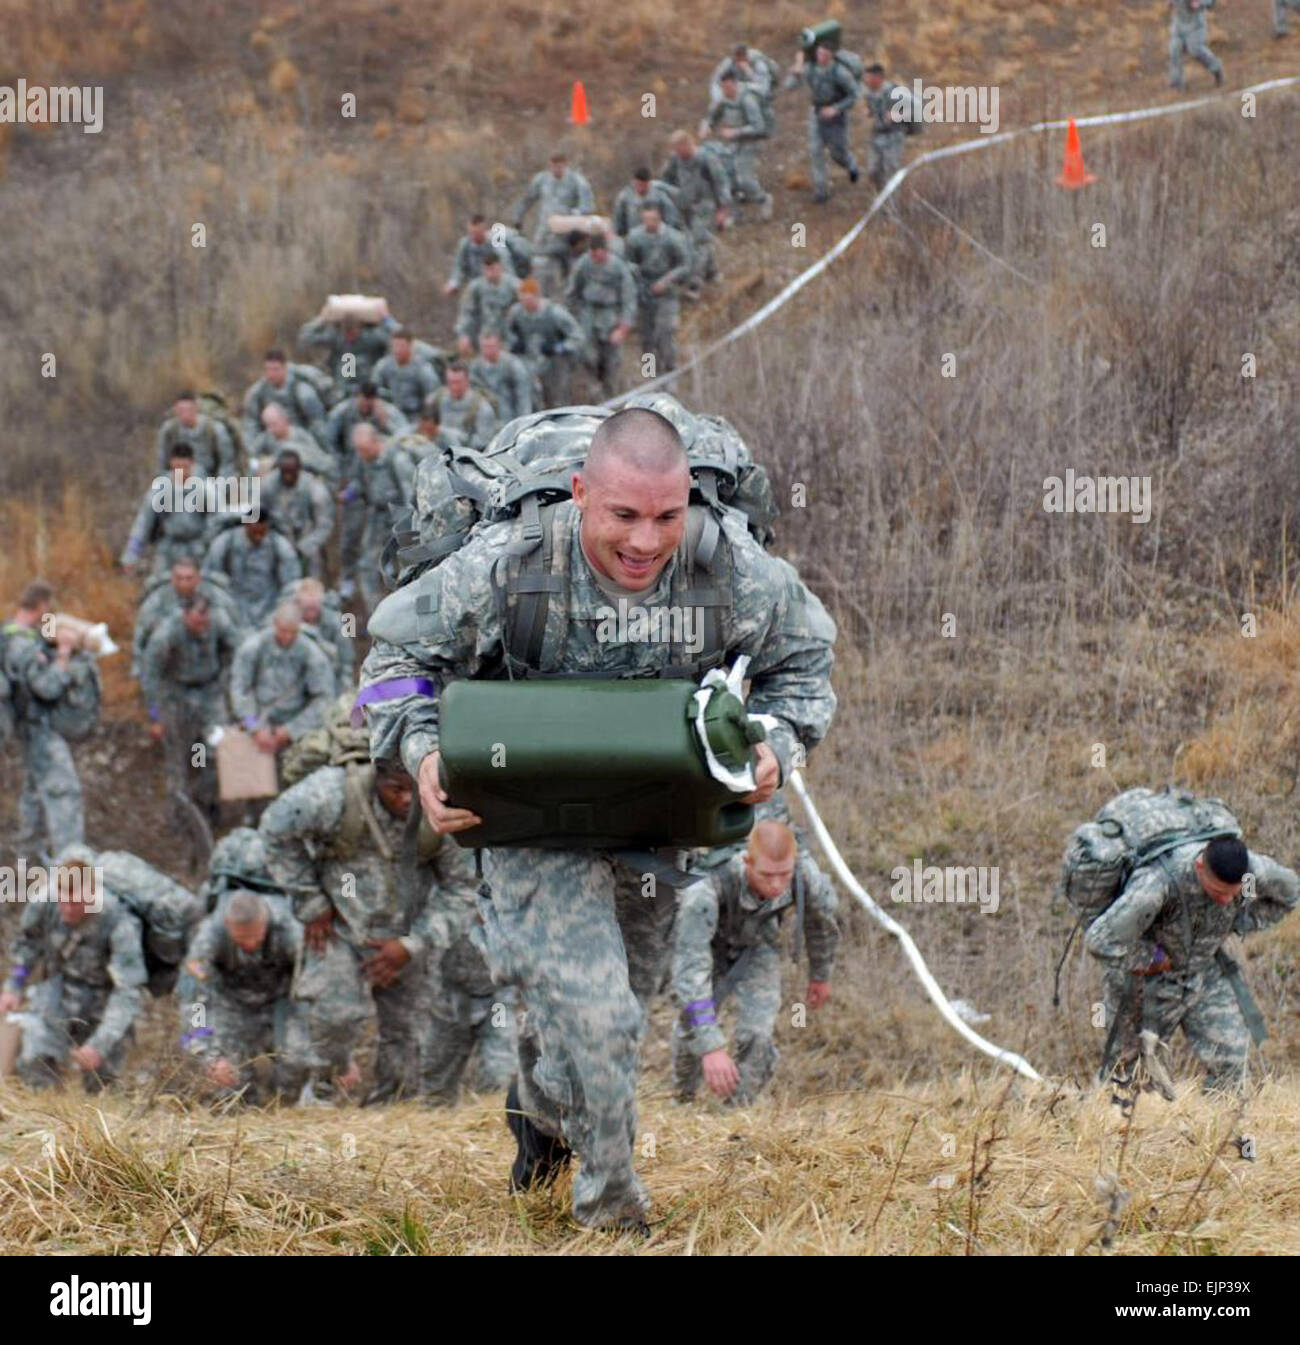 Soldiers from the 2nd Combined Arms Battalion, 34th Armor Regiment, 1st Heavy Brigade Combat Team, 1st Infantry Division, race for first place during an annual Physical Training Competition on Fort Riley, Kansas. The &quot;Dreadnaught Battalion&quot; recently returned from a deployment to the Maiwand Province in Afghanistan.  Staff Sgt. Robert DeDeaux, 1st Infantry Brigade, 1st Inf. Div. Public Affairs Stock Photo